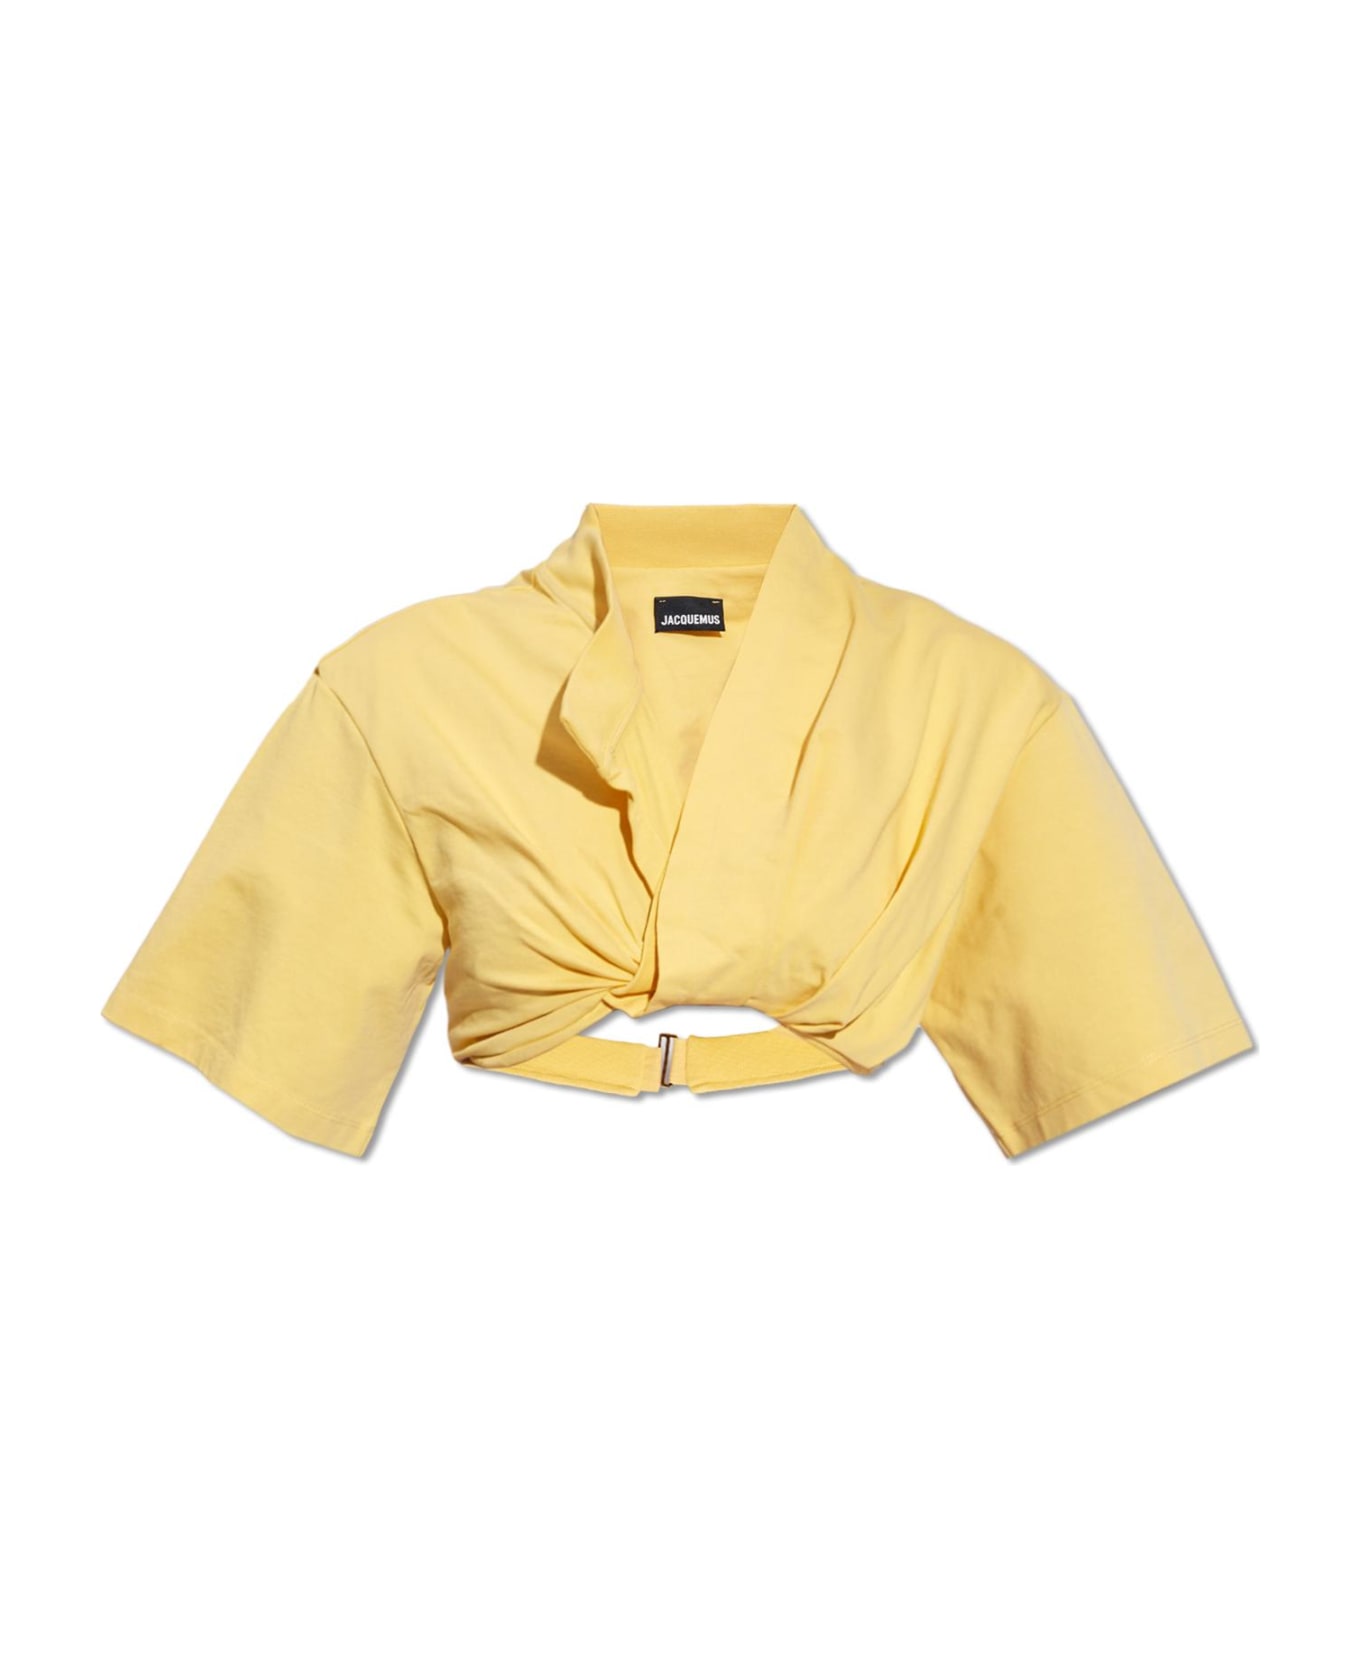 Jacquemus Cropped Top - YELLOW シャツ